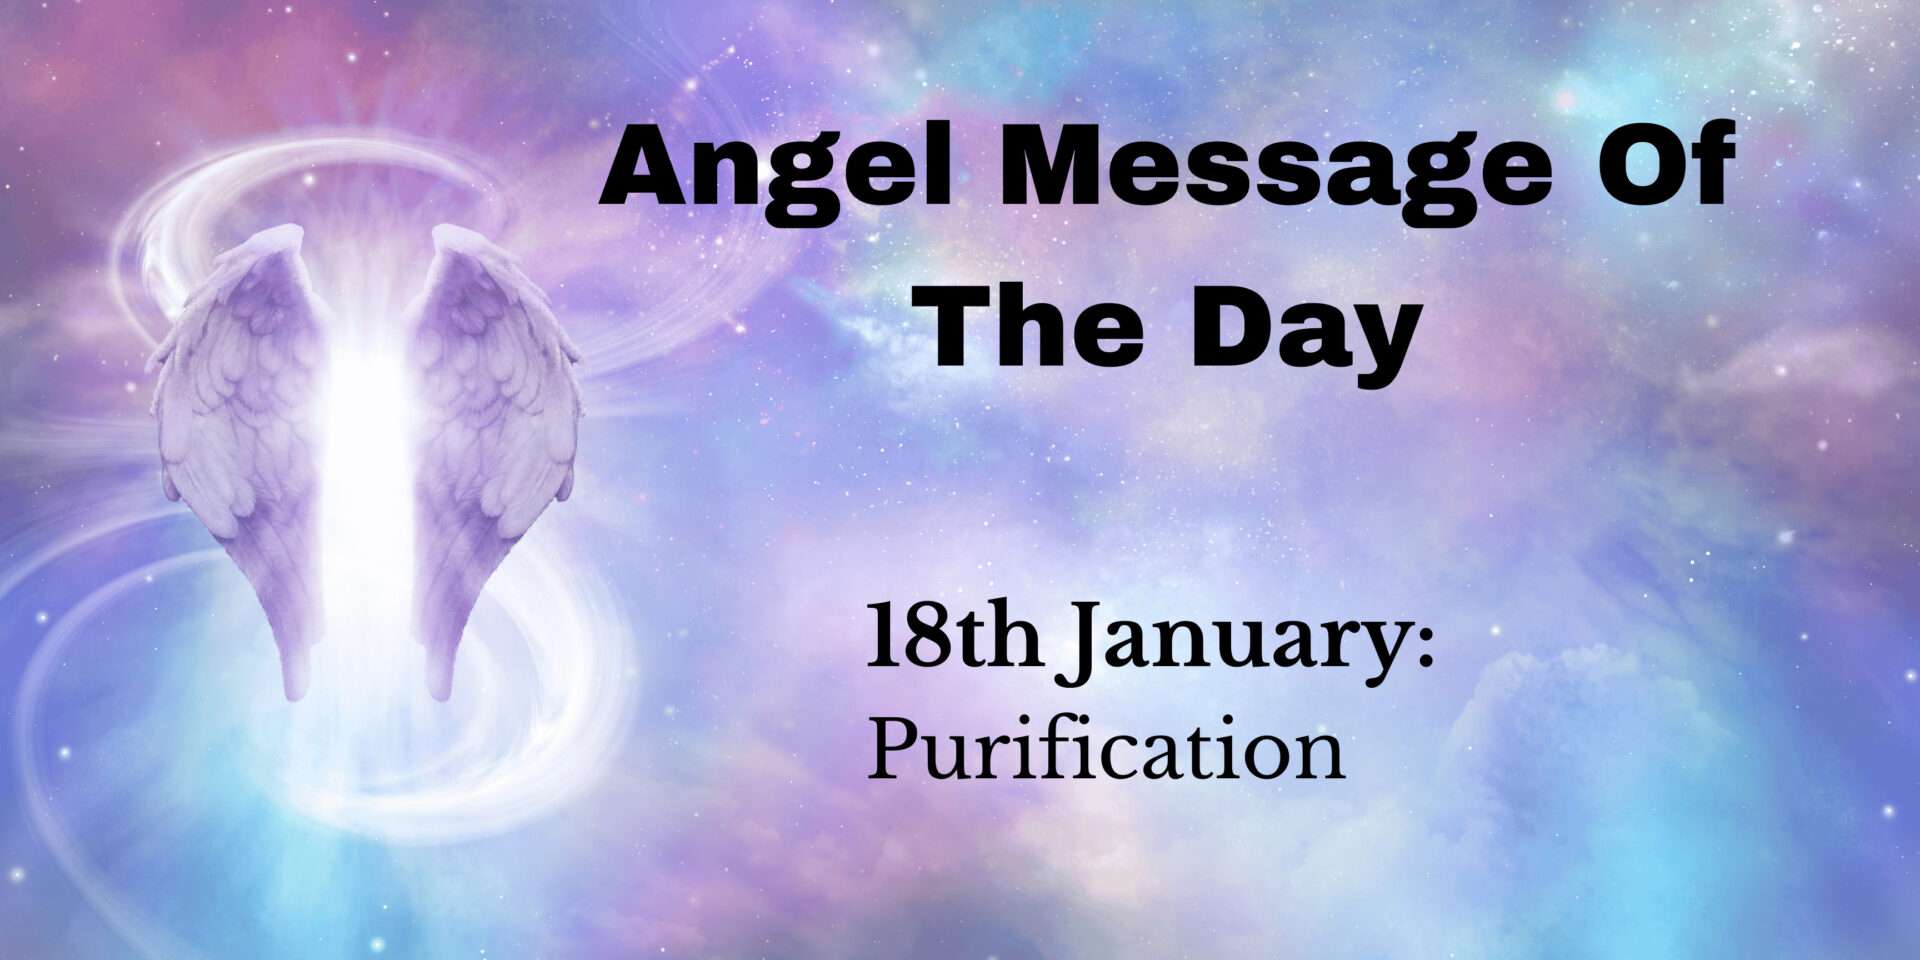 angel message of the day : purification